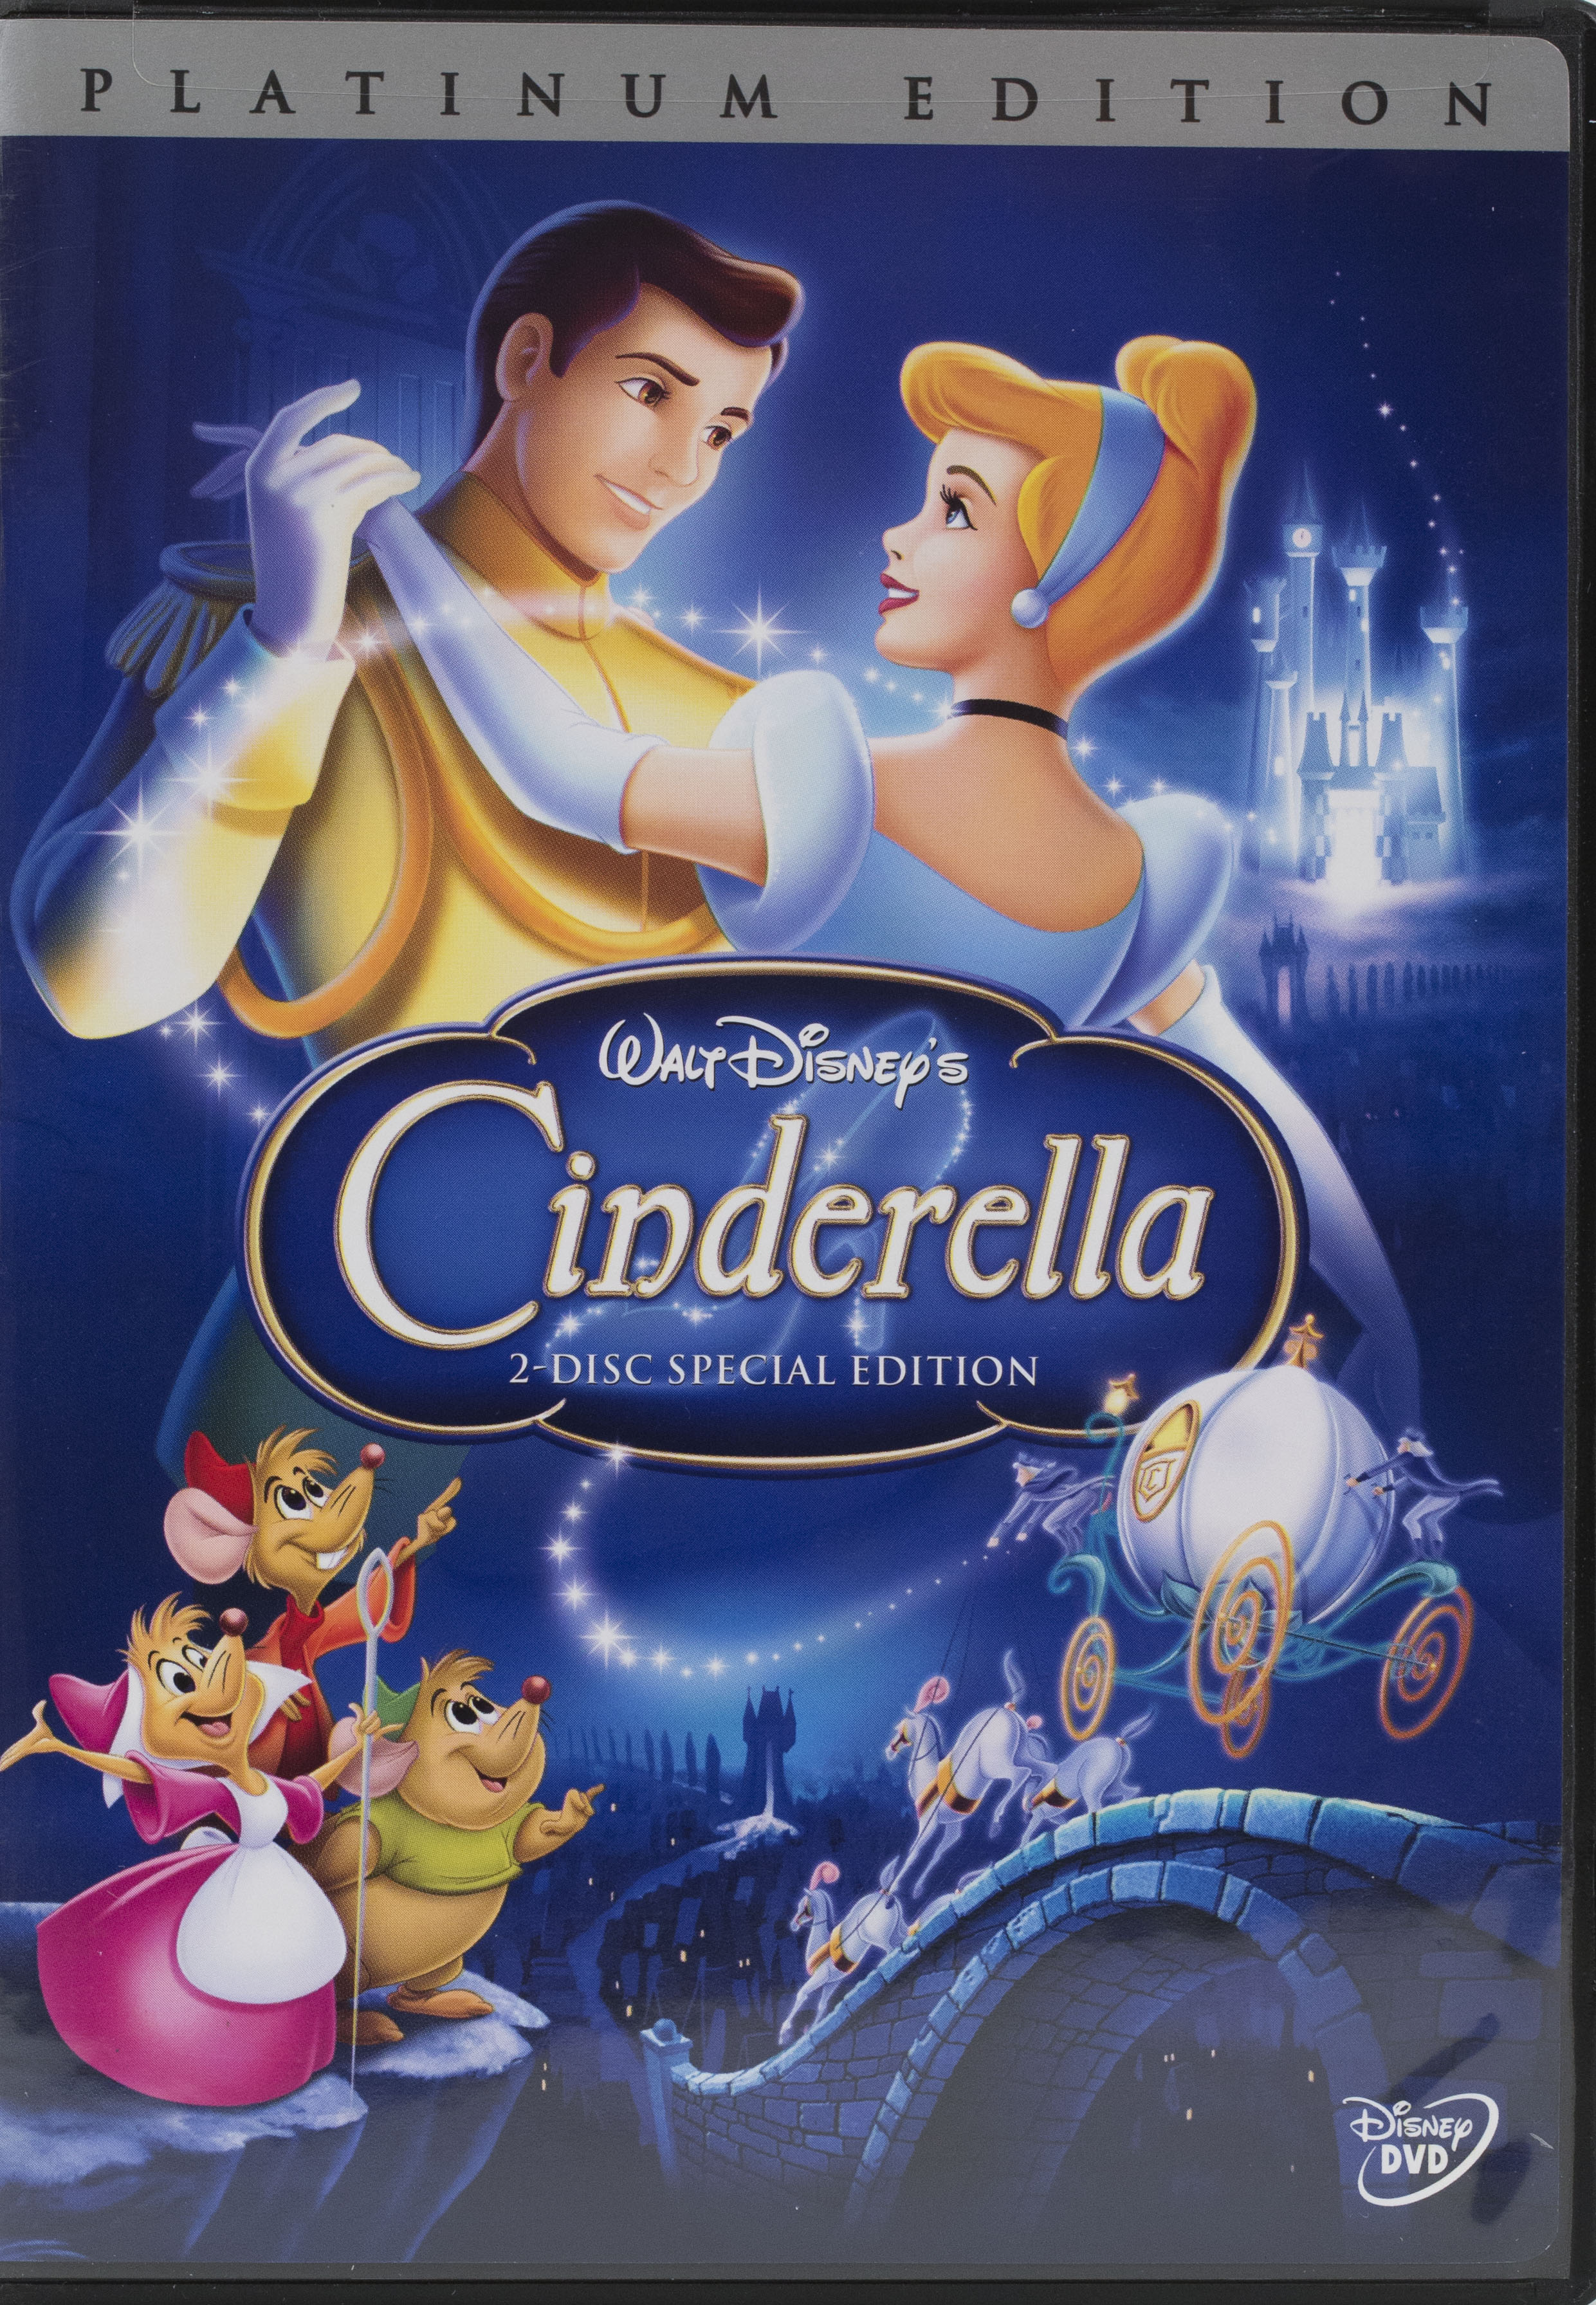 Photo of real Cinderella DVD front cover